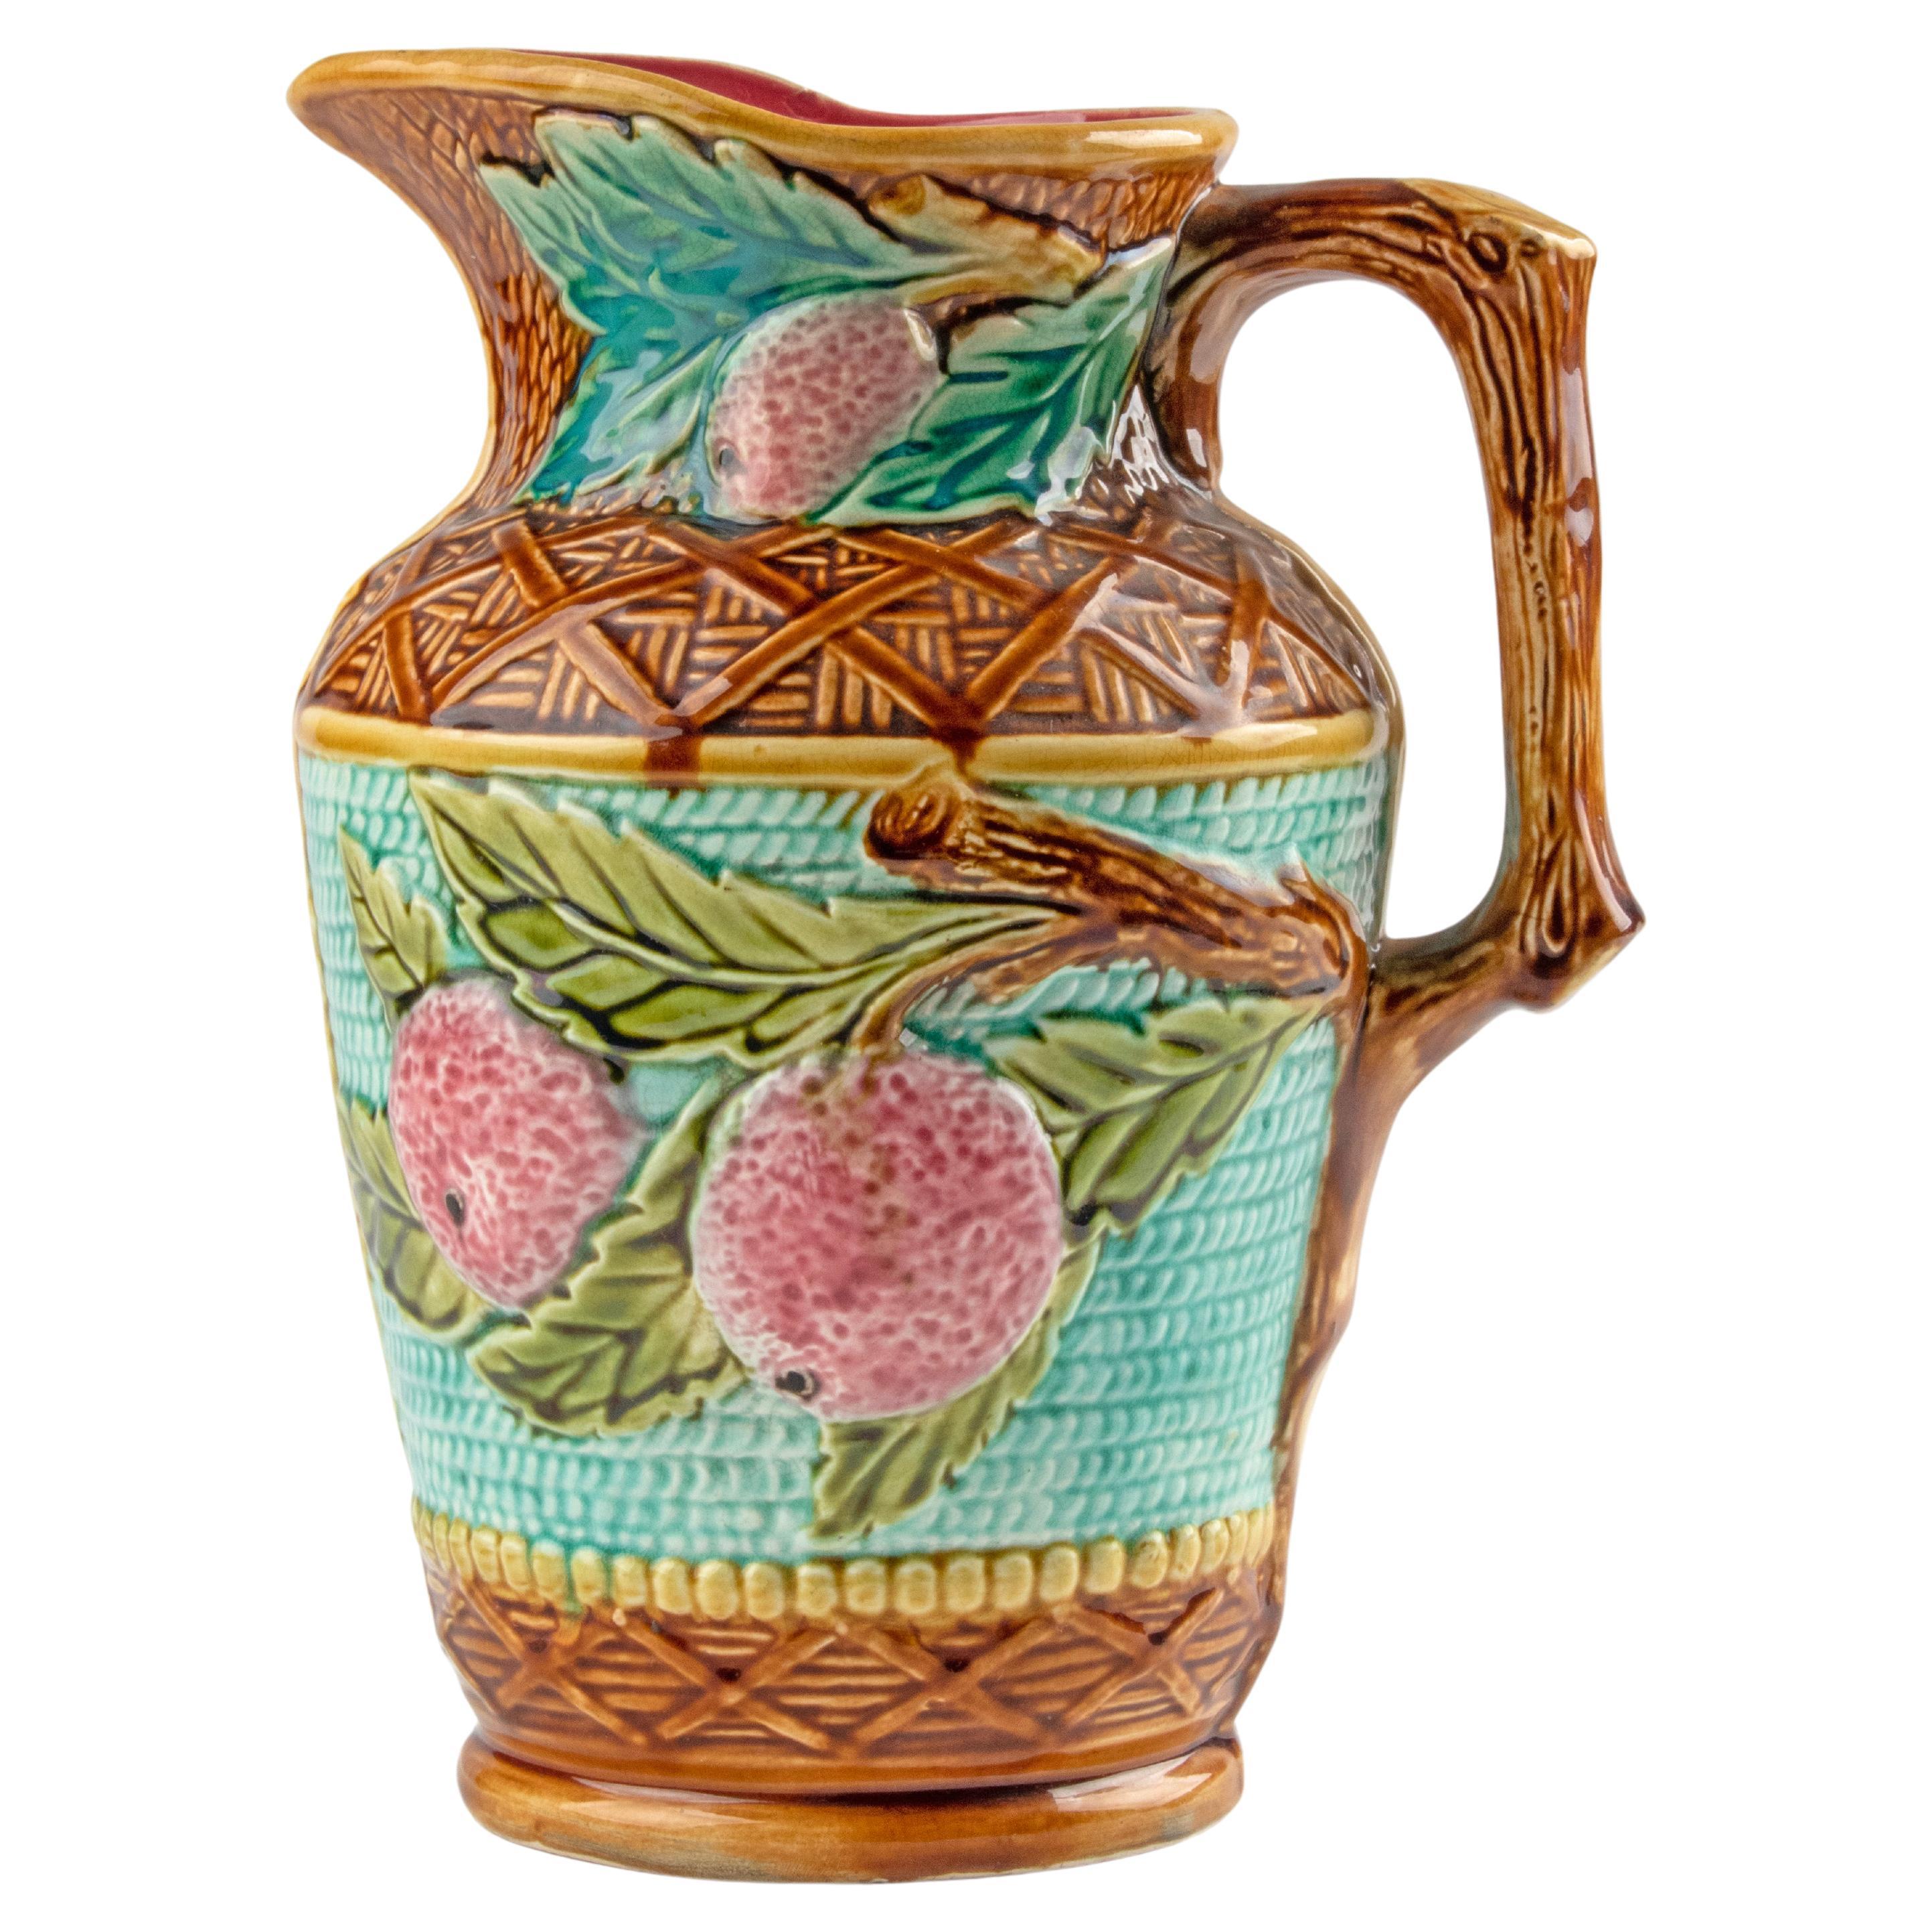 Large 19th Century Majolica Pitcher made by Nimy 